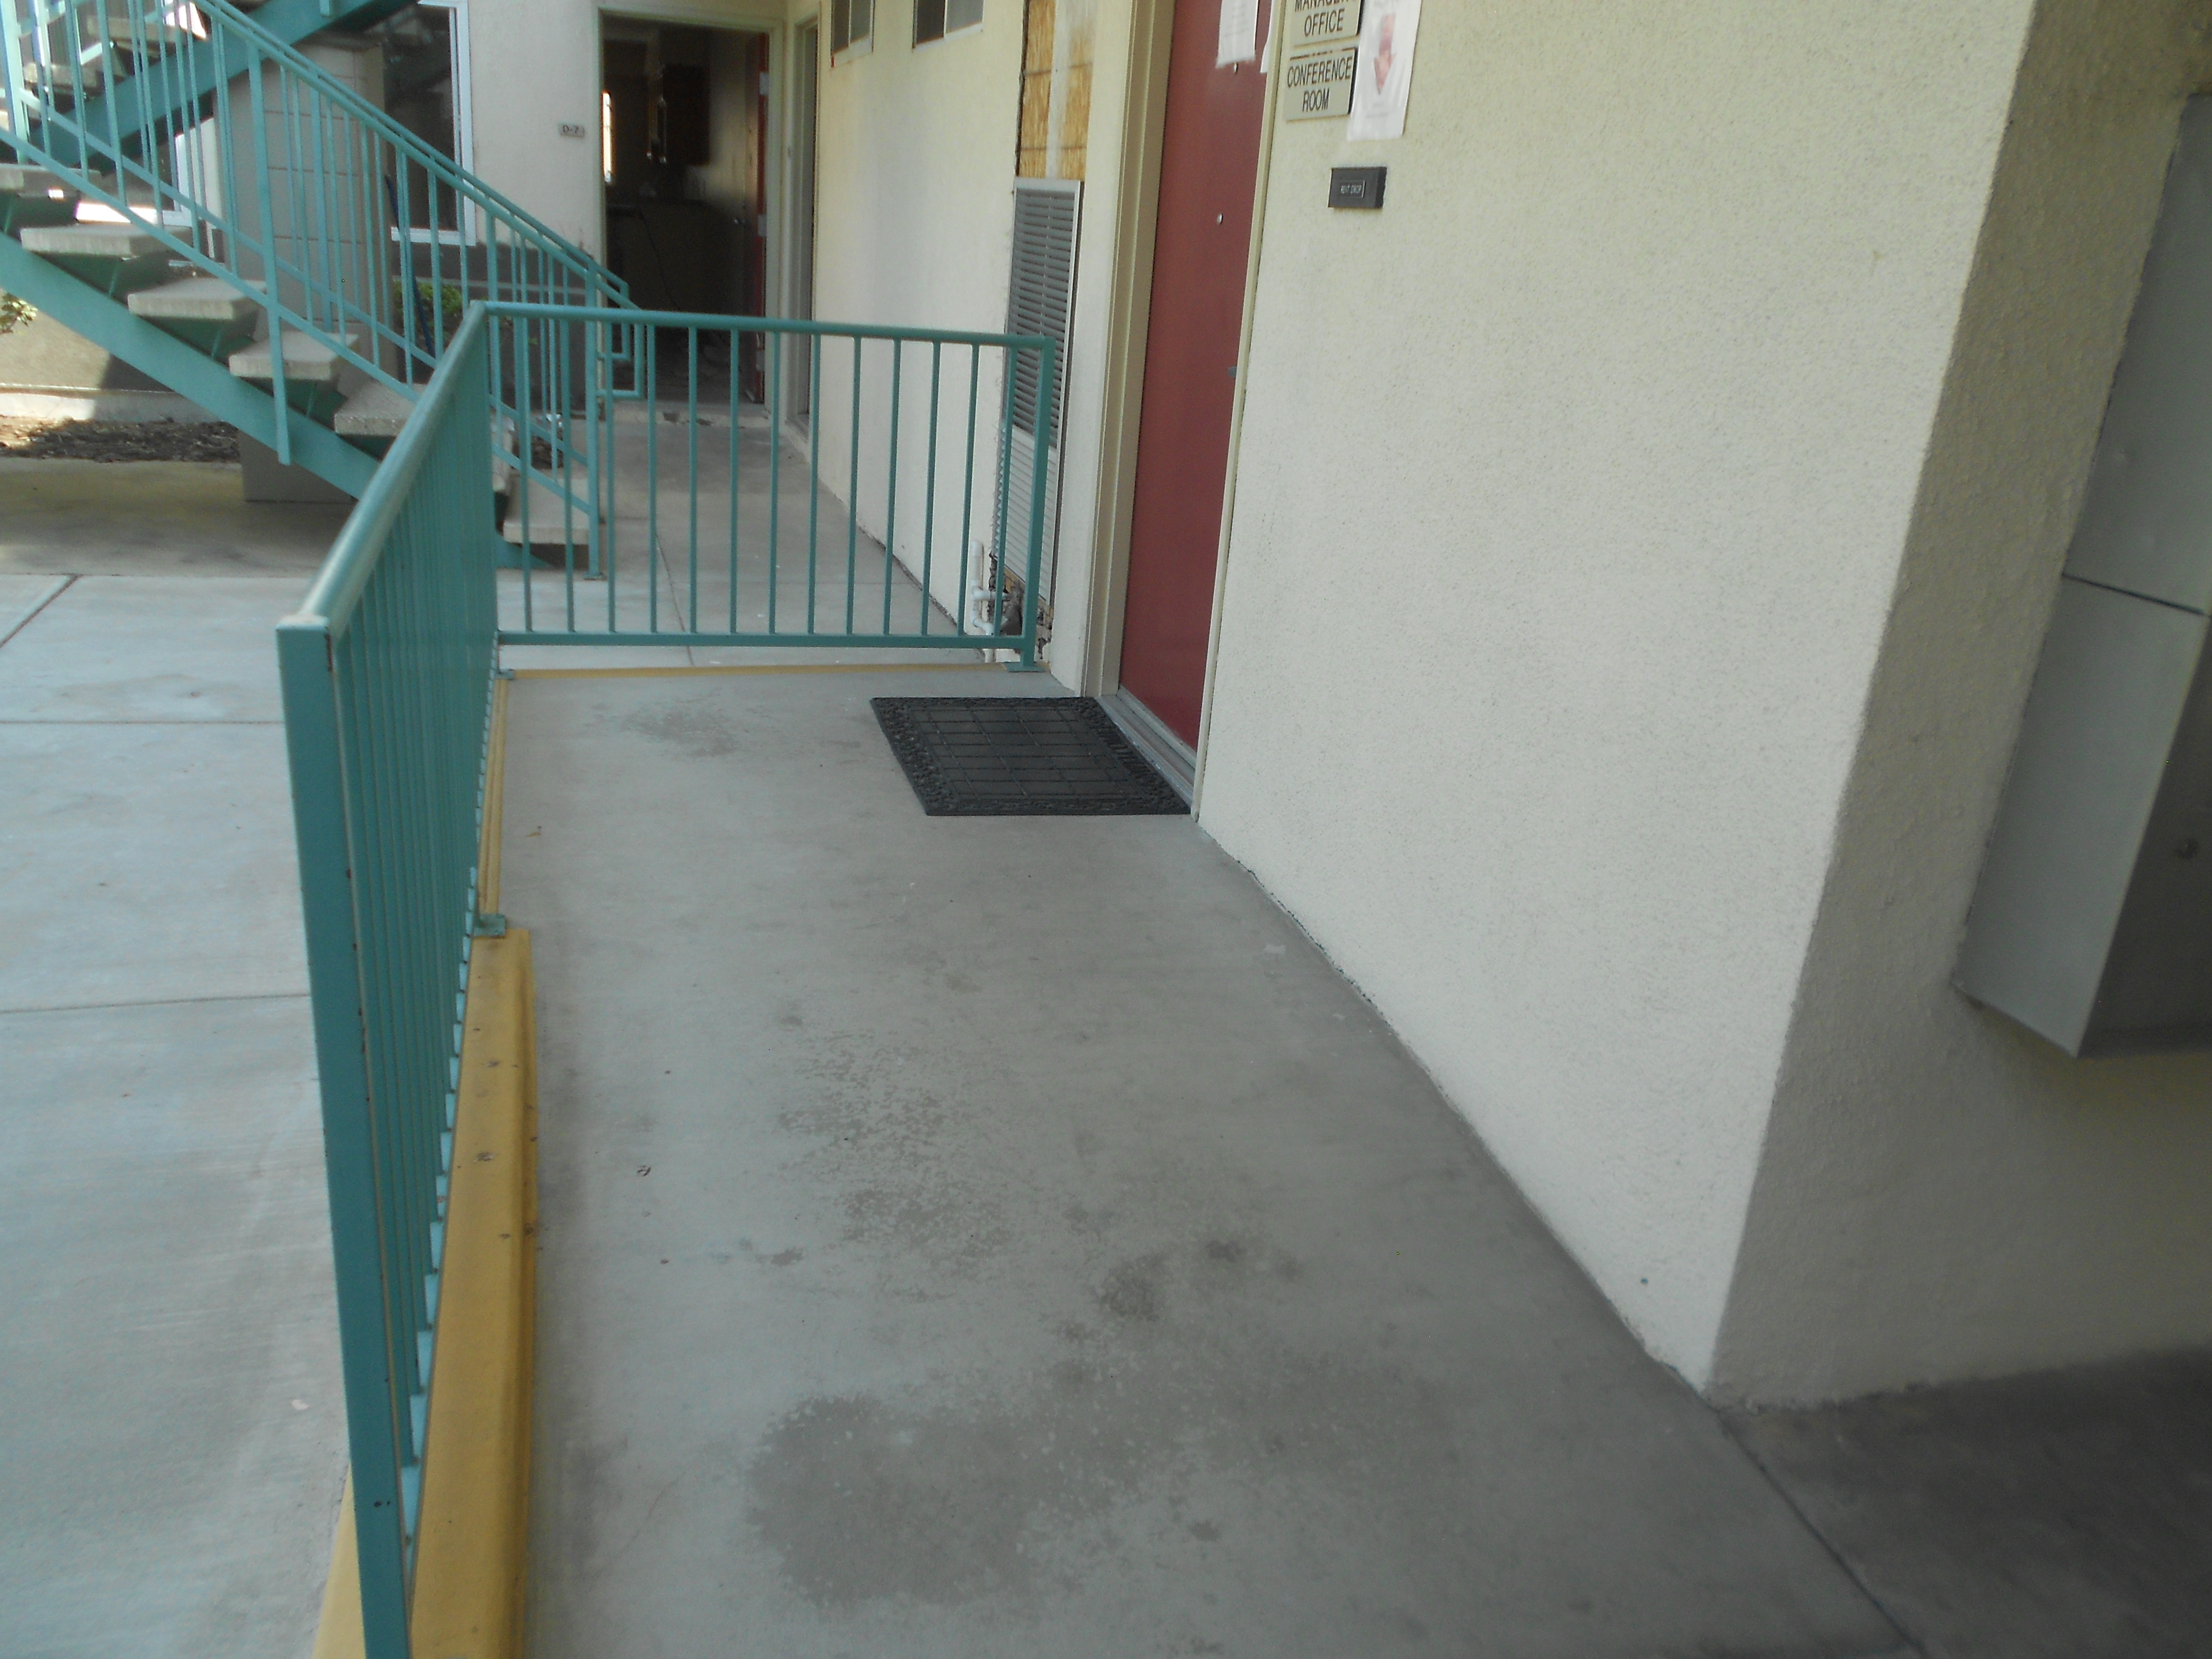 View of a ramp that leads up to conference room with a maroon door. Ramp has a turquoise railing on the side. There is a staircase with handlebars that leads upward in the back.